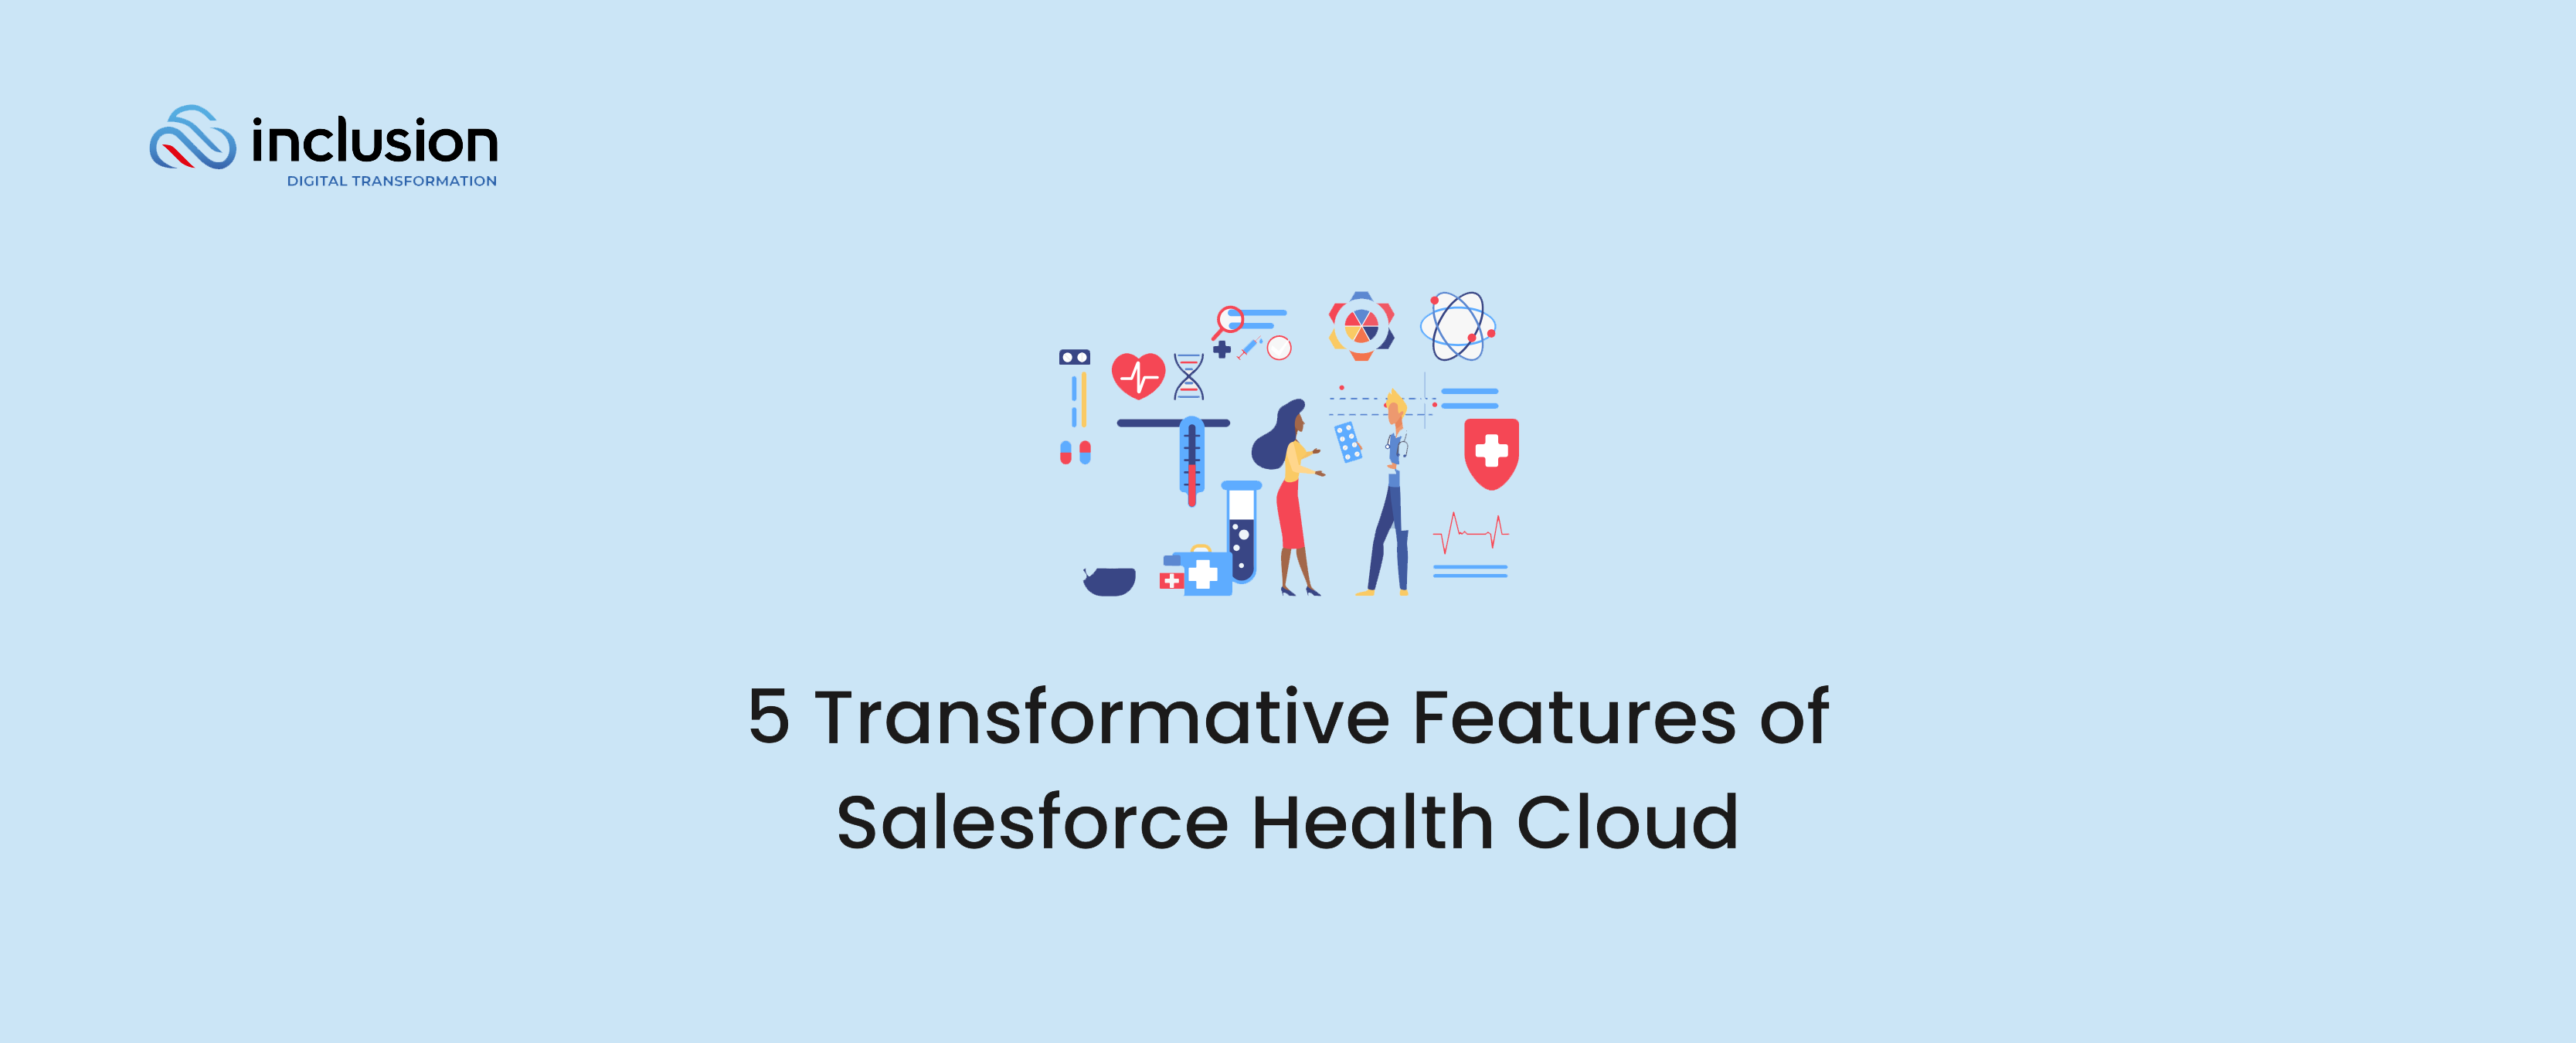 5 Transformative Features of Salesforce Health Cloud